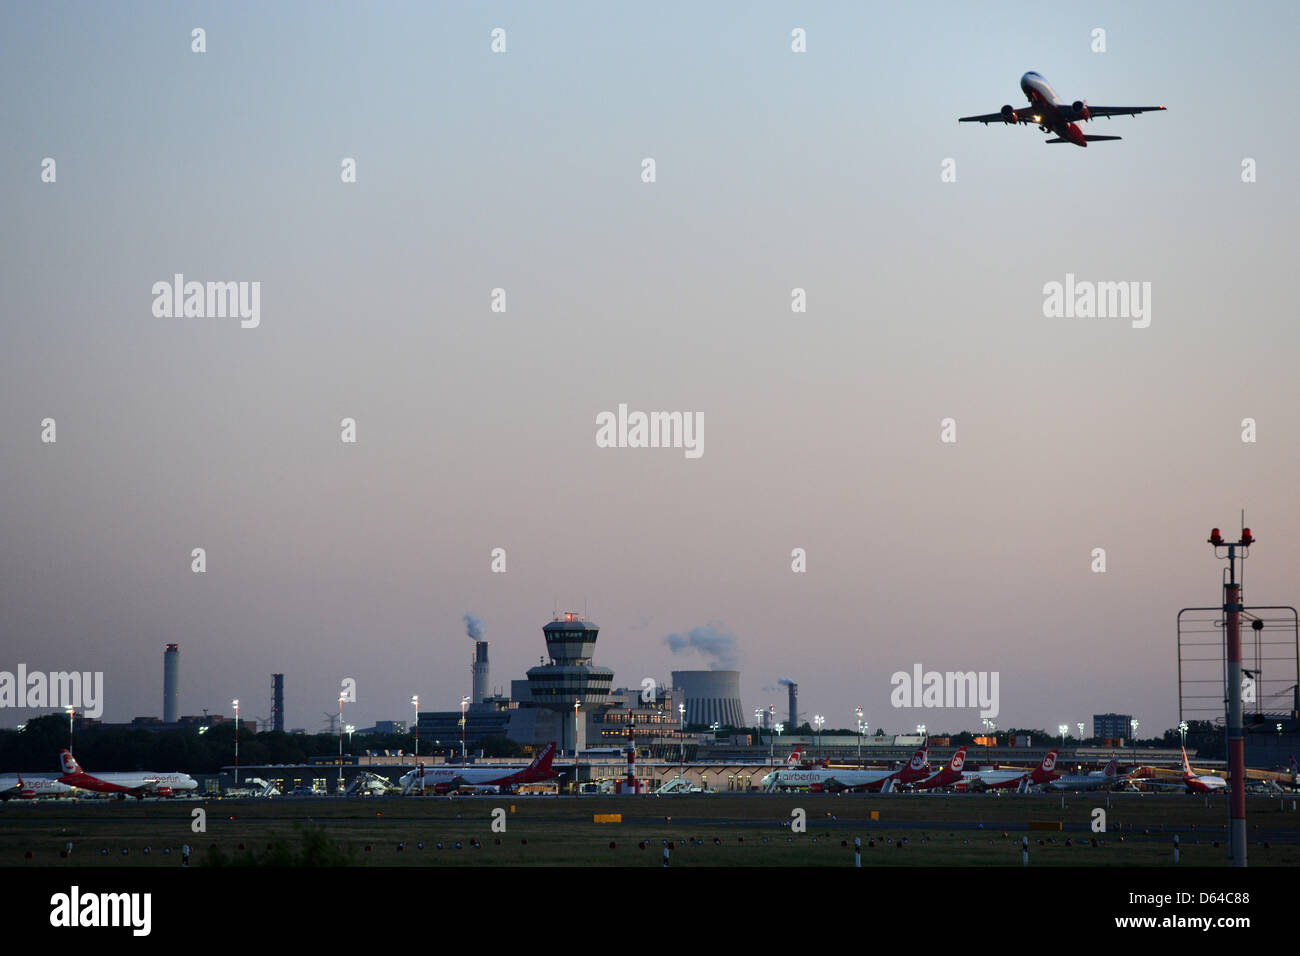 An airplane takes off at dusk at Tegel Airport in Berlin, Germany, 24 May 2012. There are discussions about admitting night flights in Tegel after the opening of the new Berlin International Airport (BER) had to be pushed back to 2013. Foto: Matthias Balk dpa/lbn Stock Photo